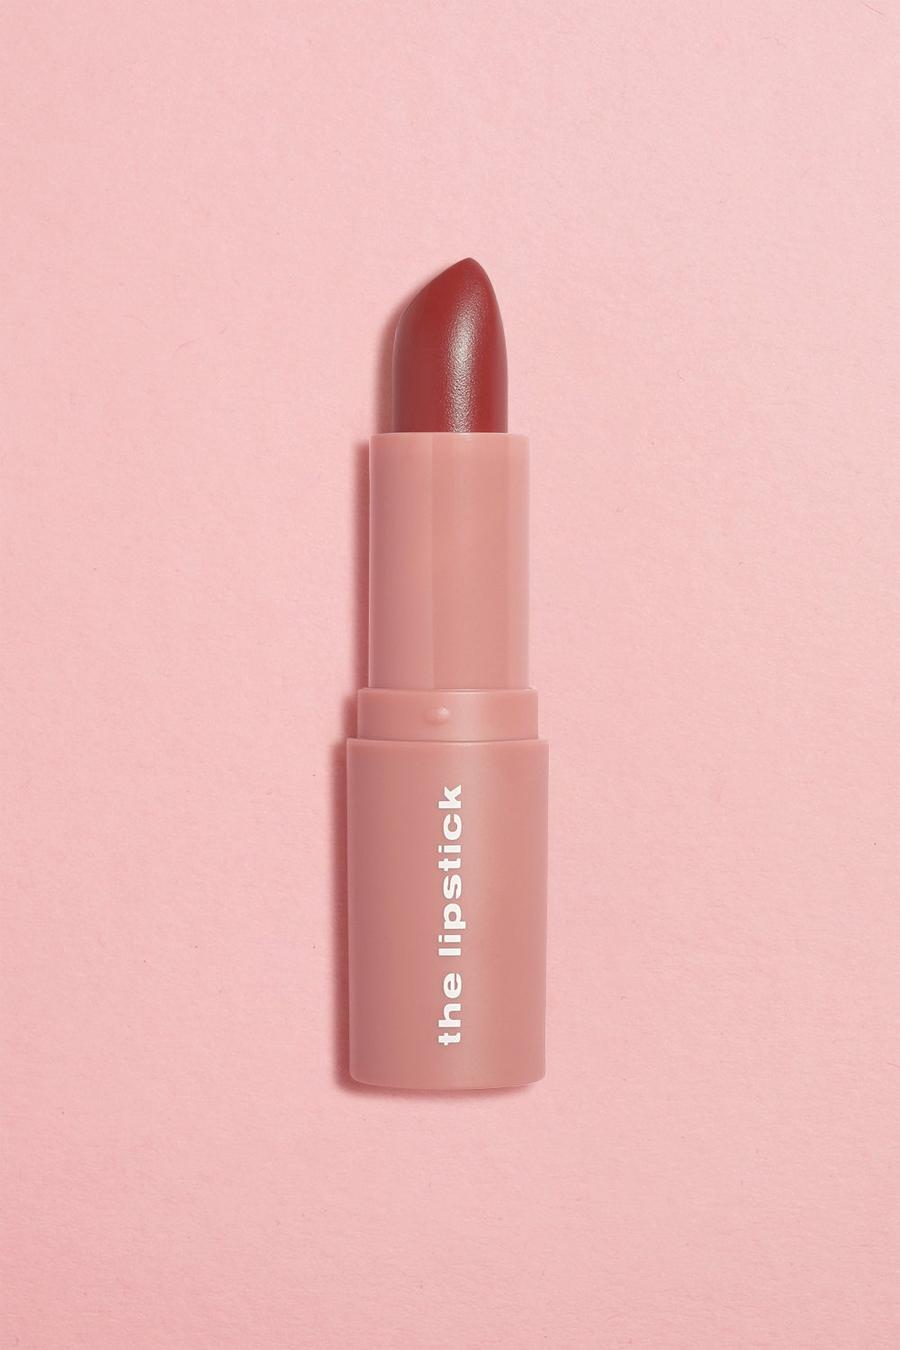 Boohoo Beauty - Rossetto The Lipstick - Warm Brown